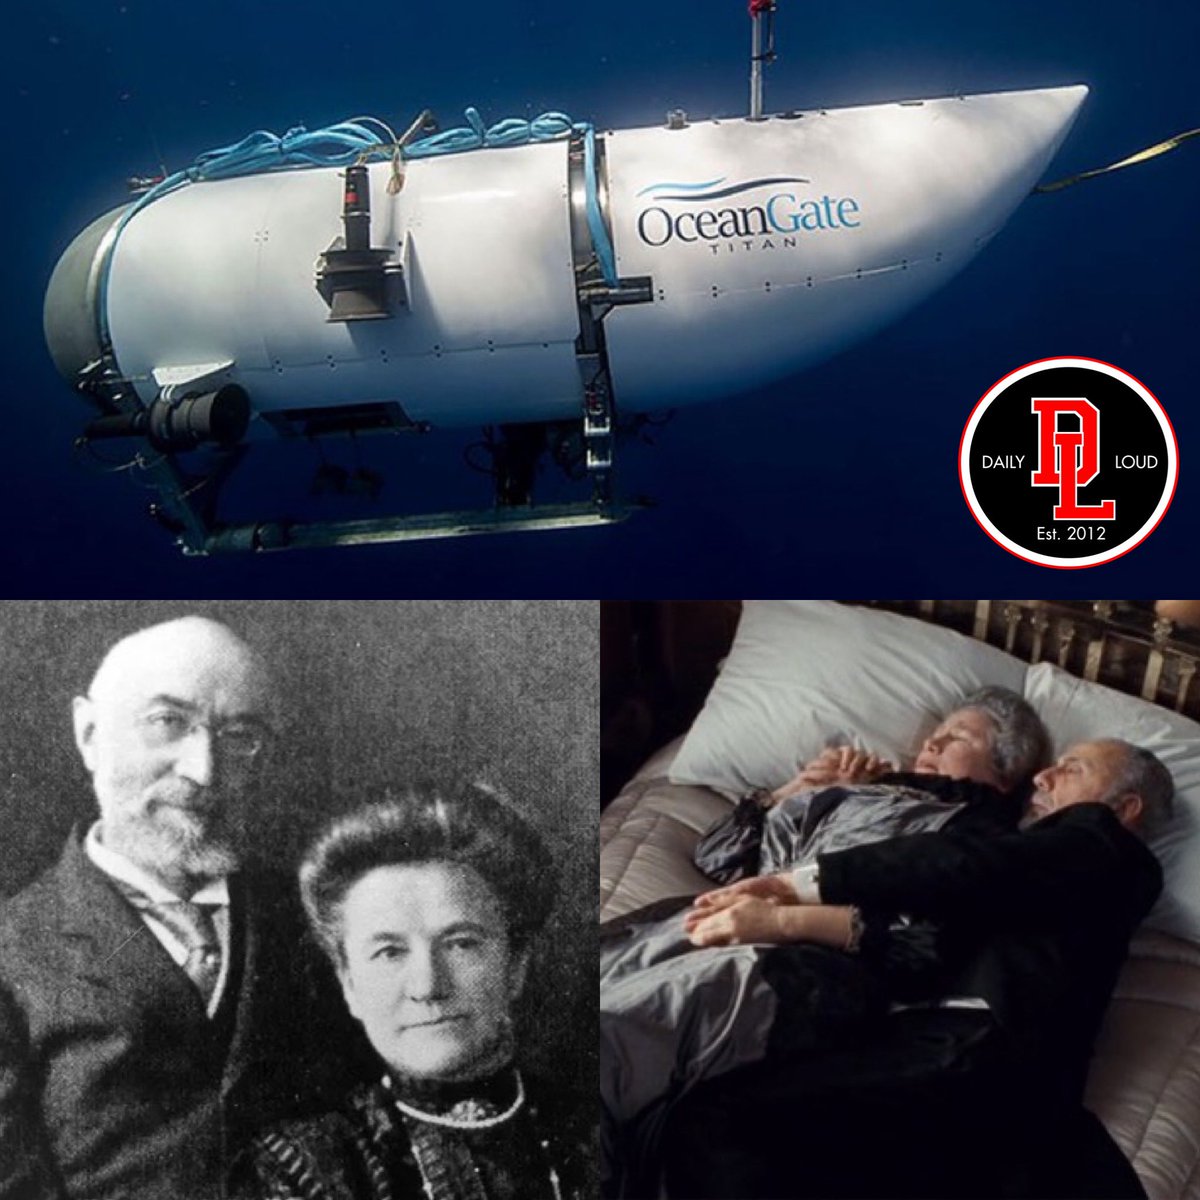 @danielmarven Out of time. The creator of the Titan submissible's great grand parents died in the titanic.
How ironic...